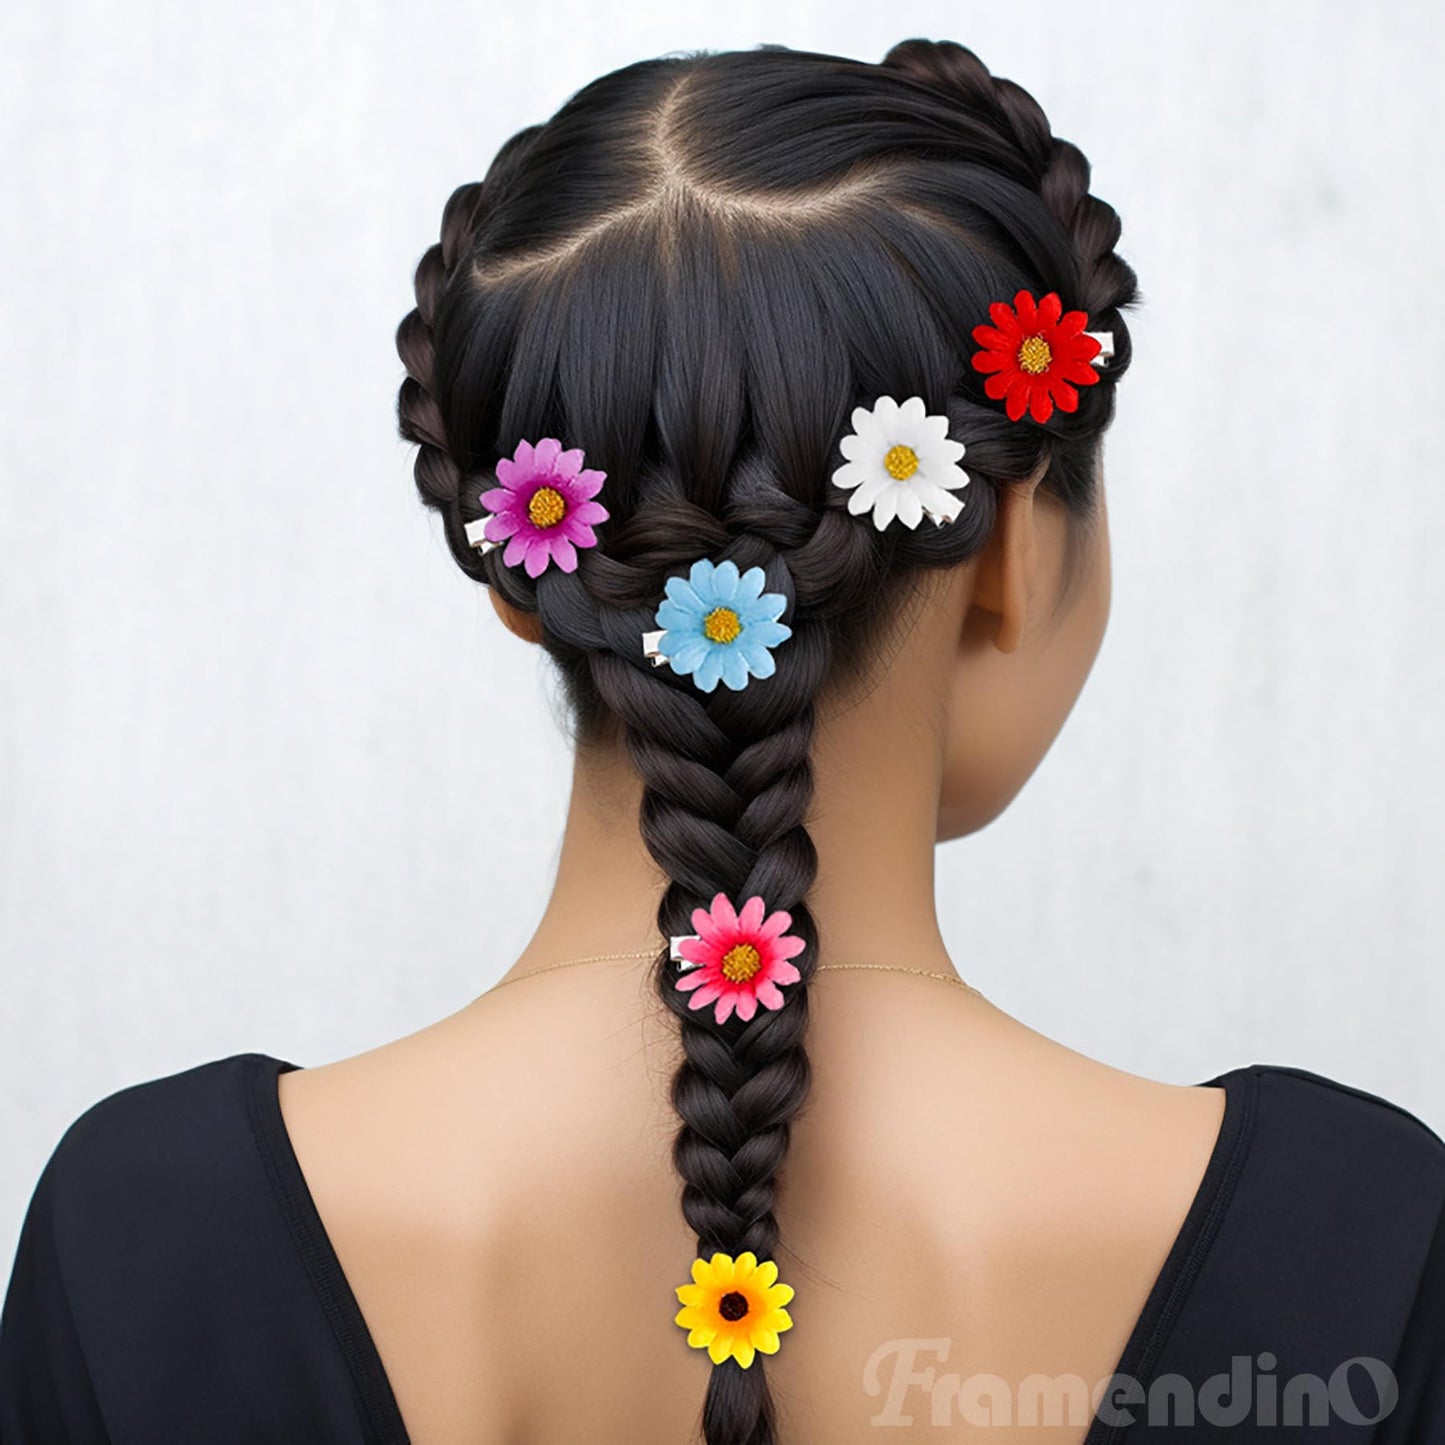 Framendino, 36 Pack Sunflower Daisies Hair Clips Flower Daisy Clips for Wedding Party 6 Colors